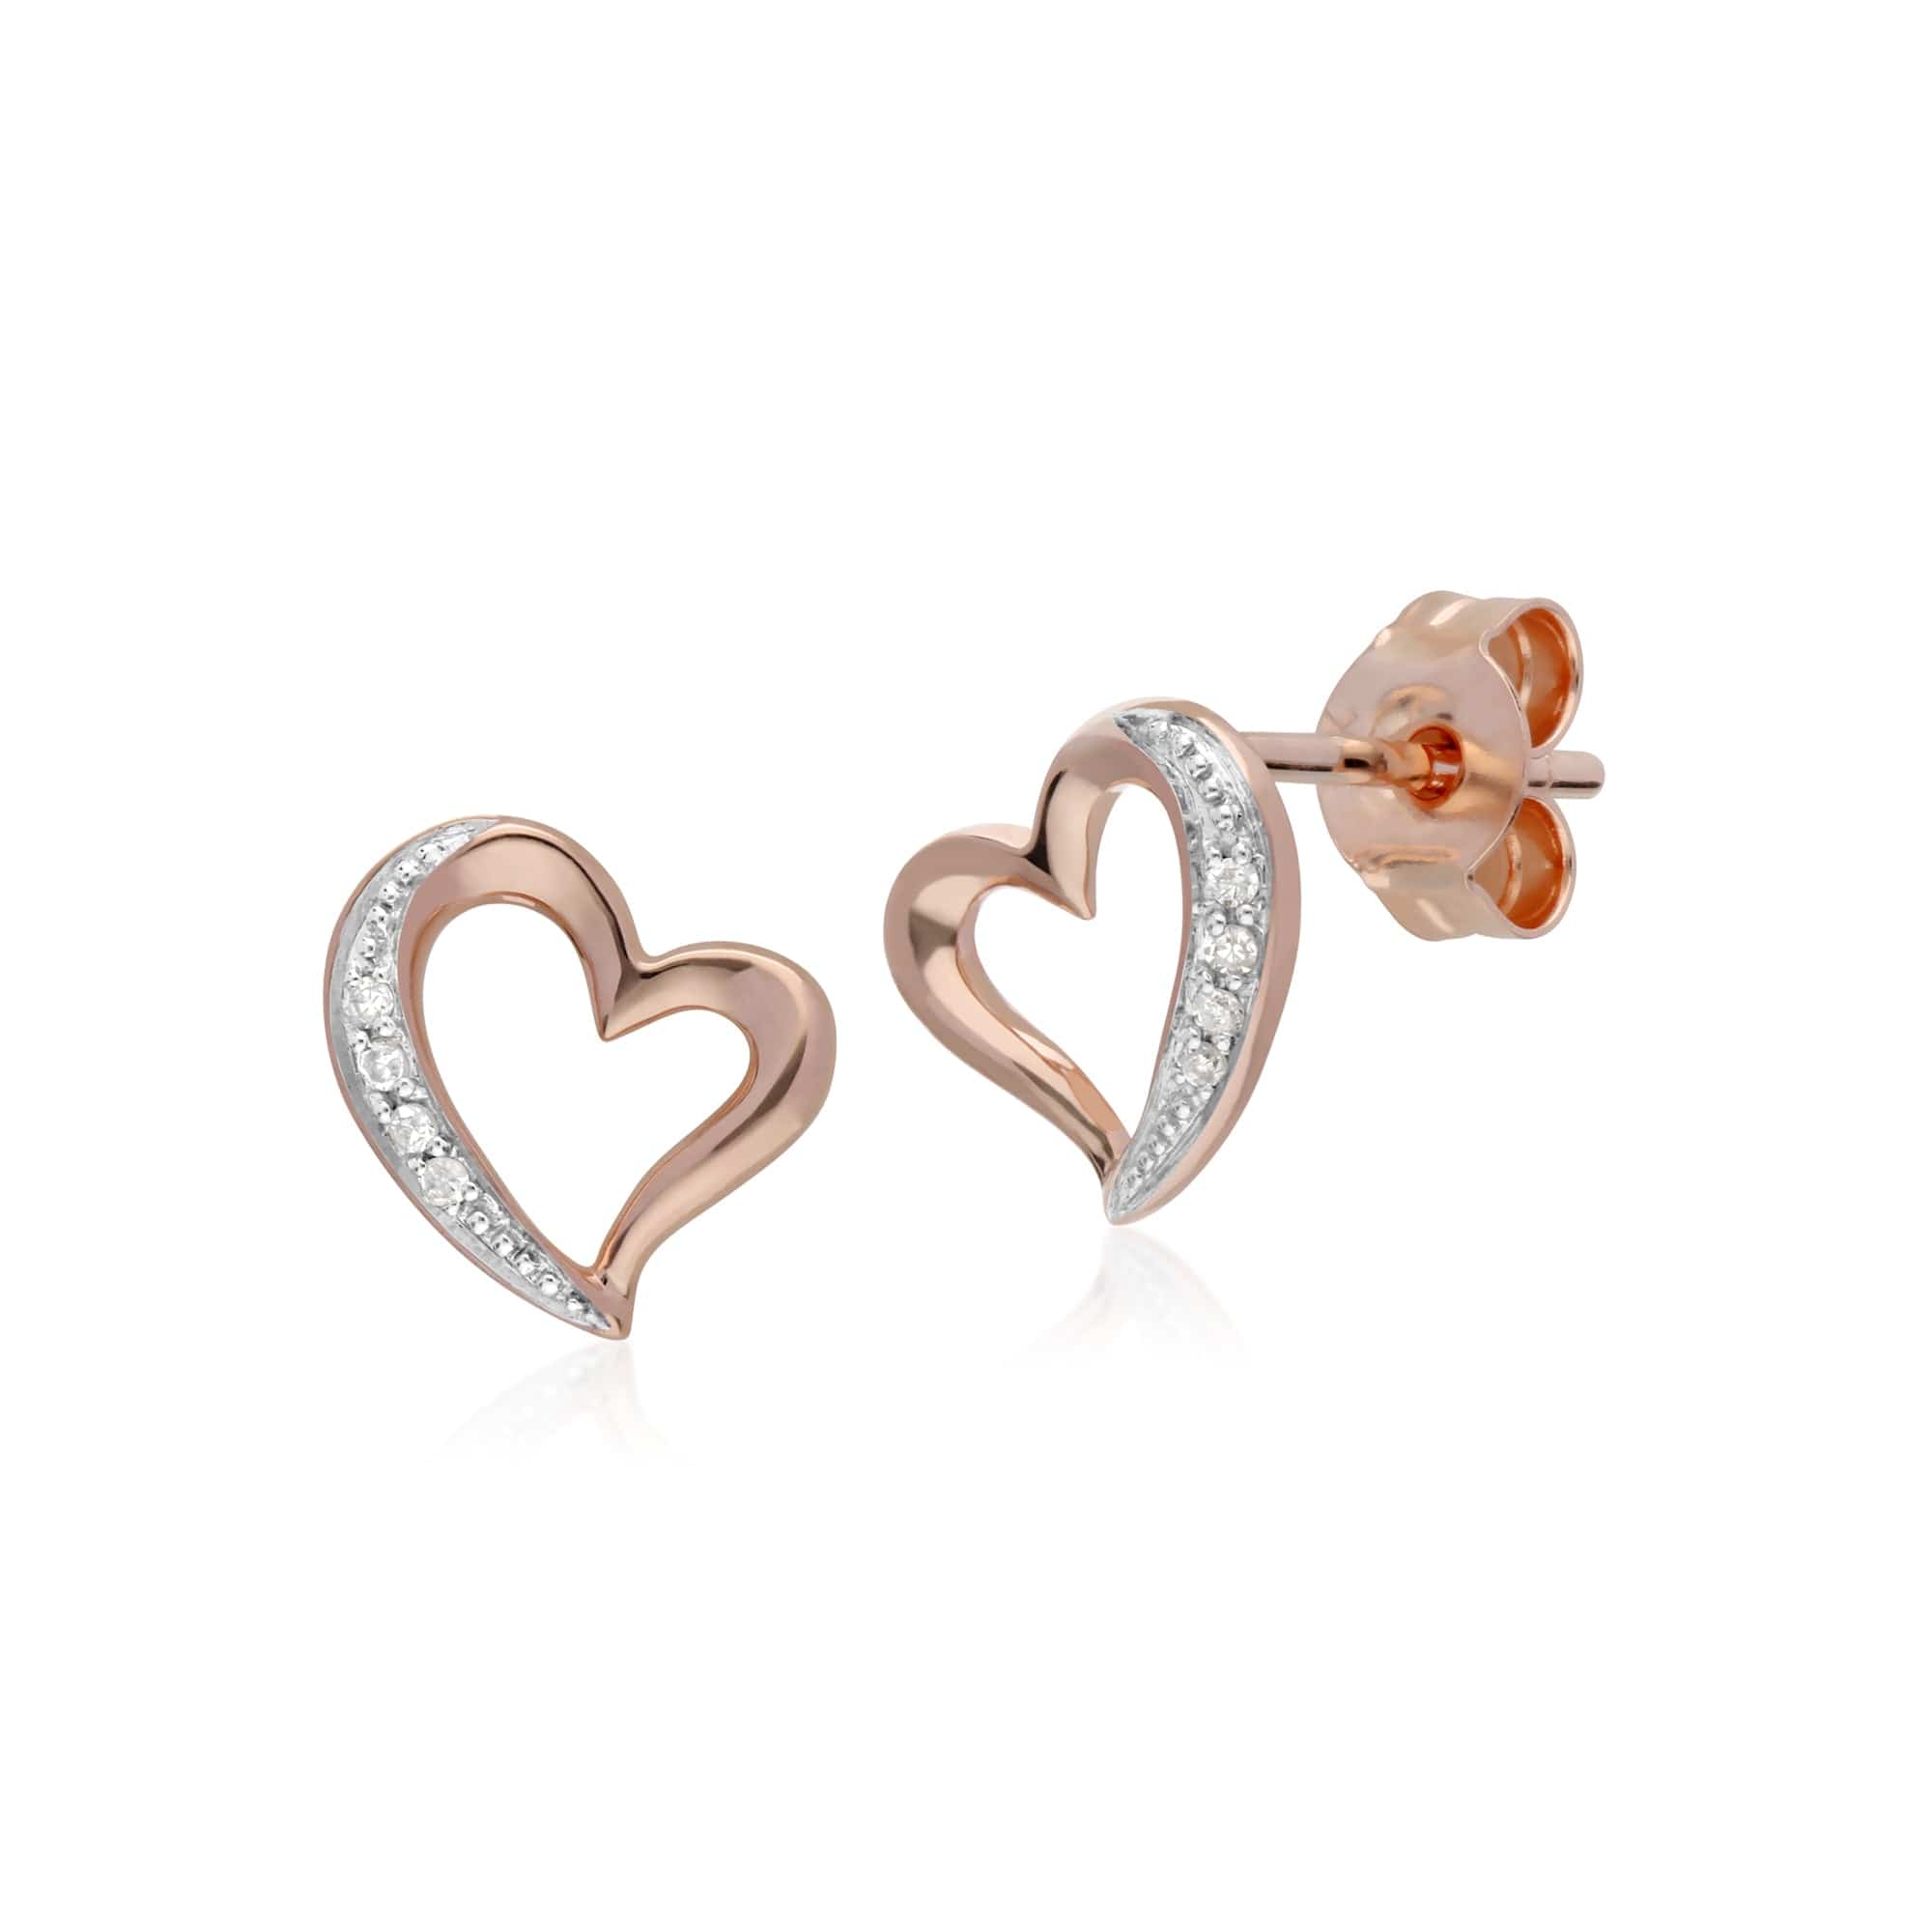 Classic Round Diamond Open Love Heart Stud Earrings in 9ct Rose Gold